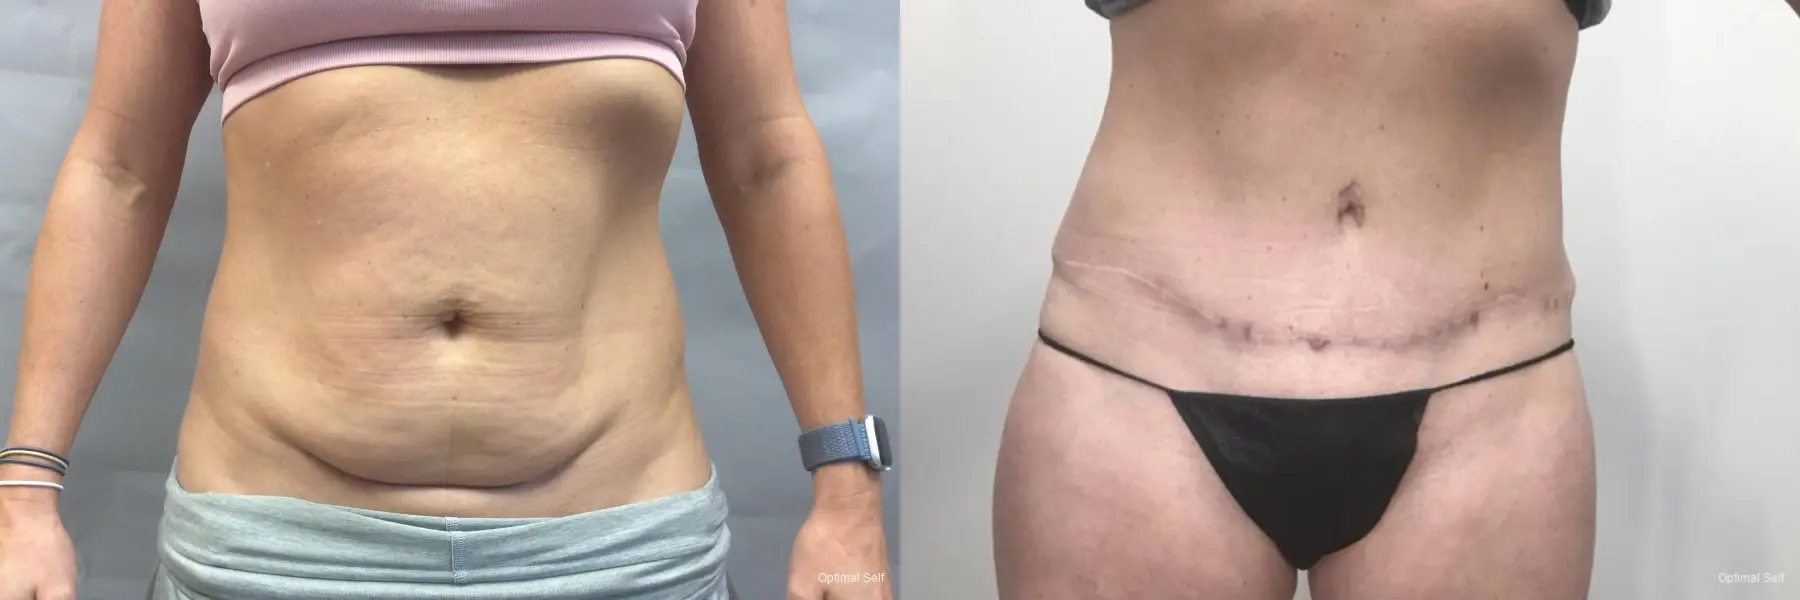 Abdominoplasty: Patient 7 - Before and After  